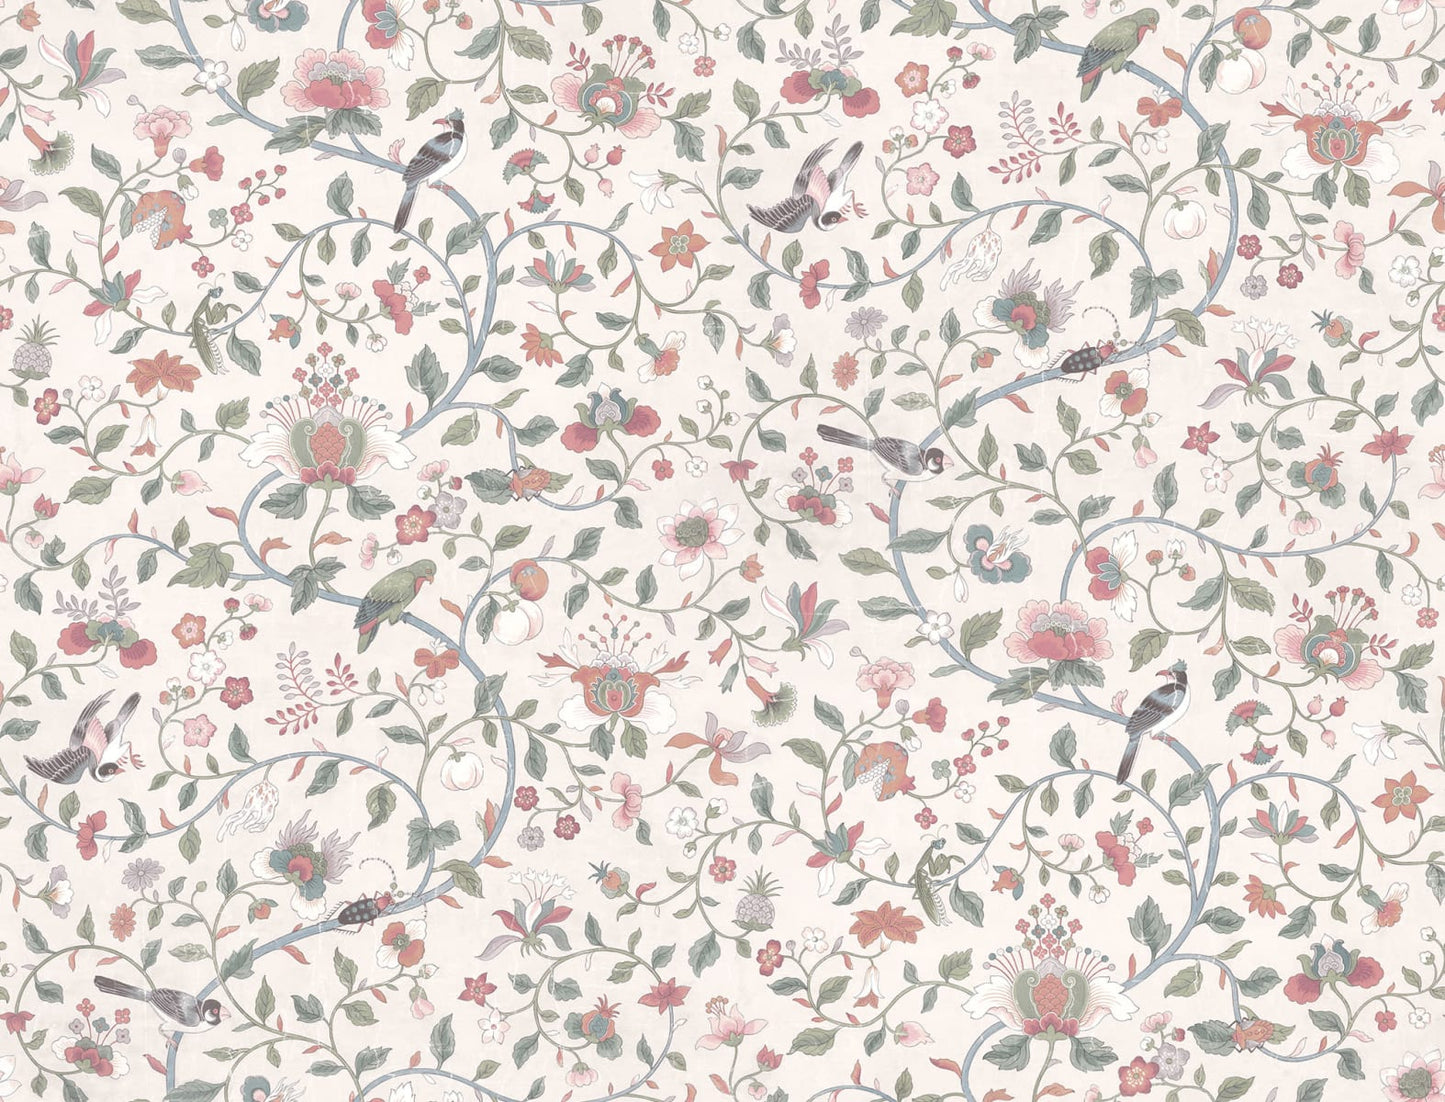 Hedda wallpaper has an exquisitely detailed older hand-painted original, which, with its multifaceted colors, can match many different interiors. 